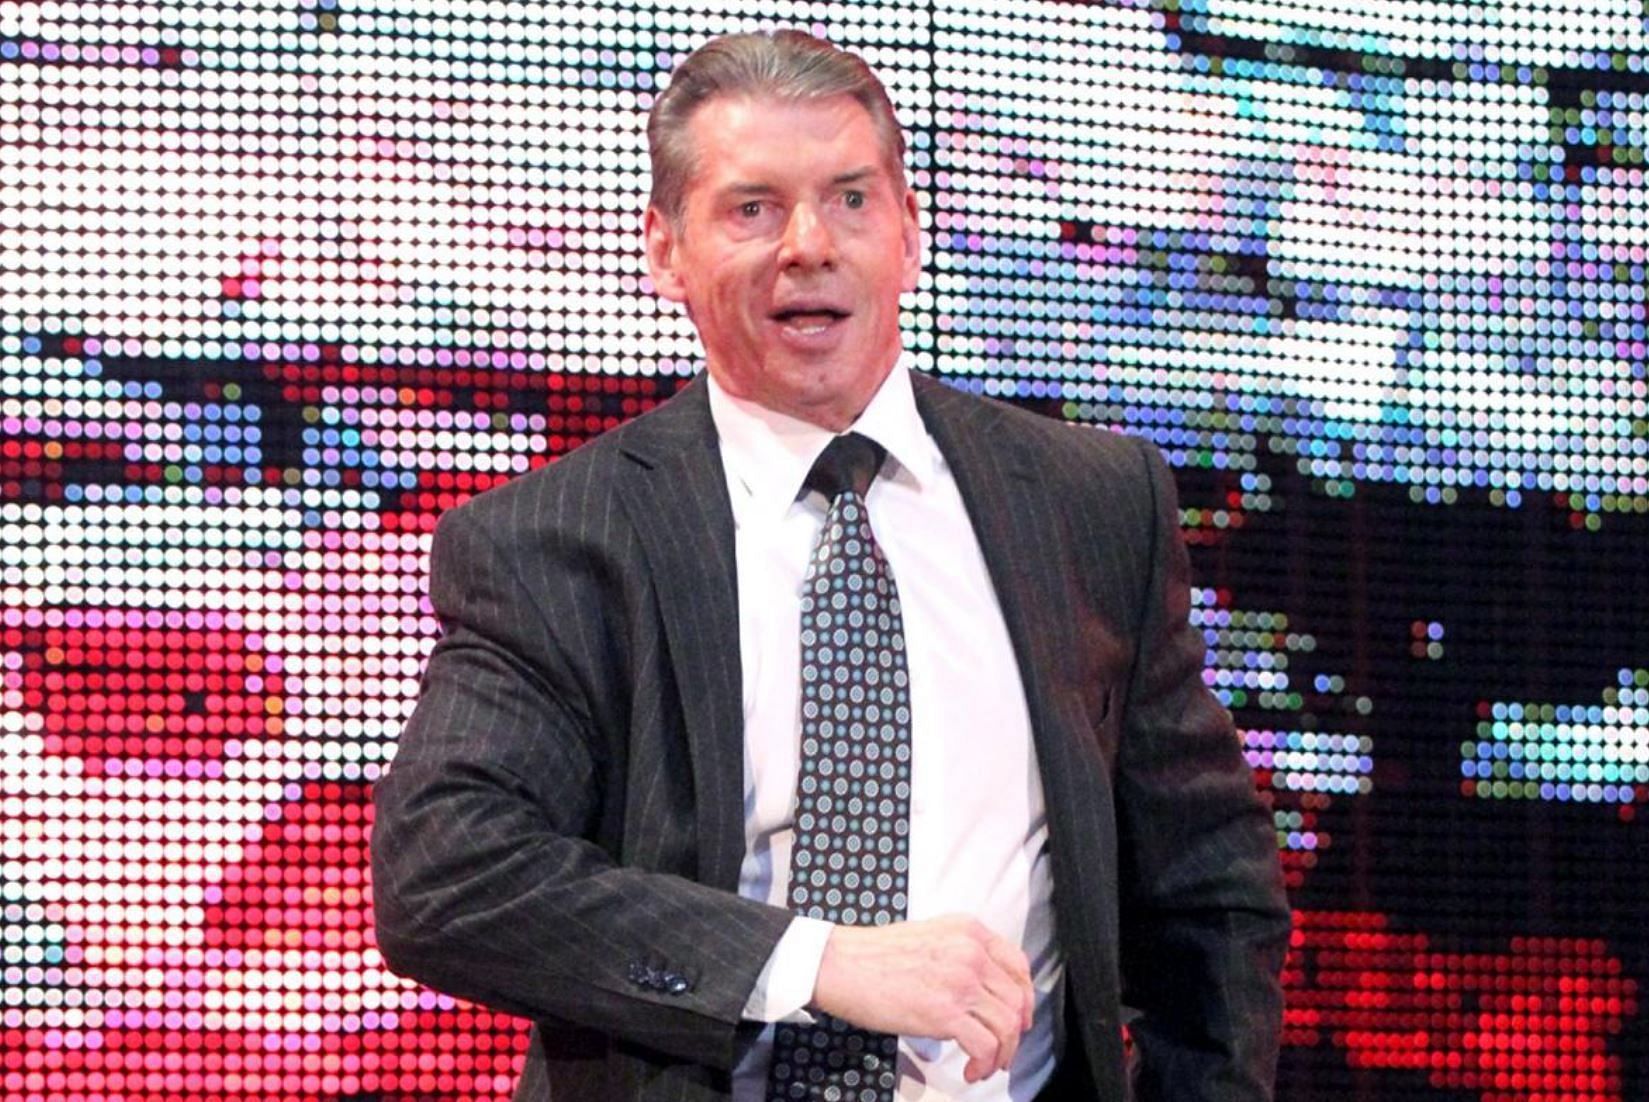 Mr. McMahon is the current WWE Chairman